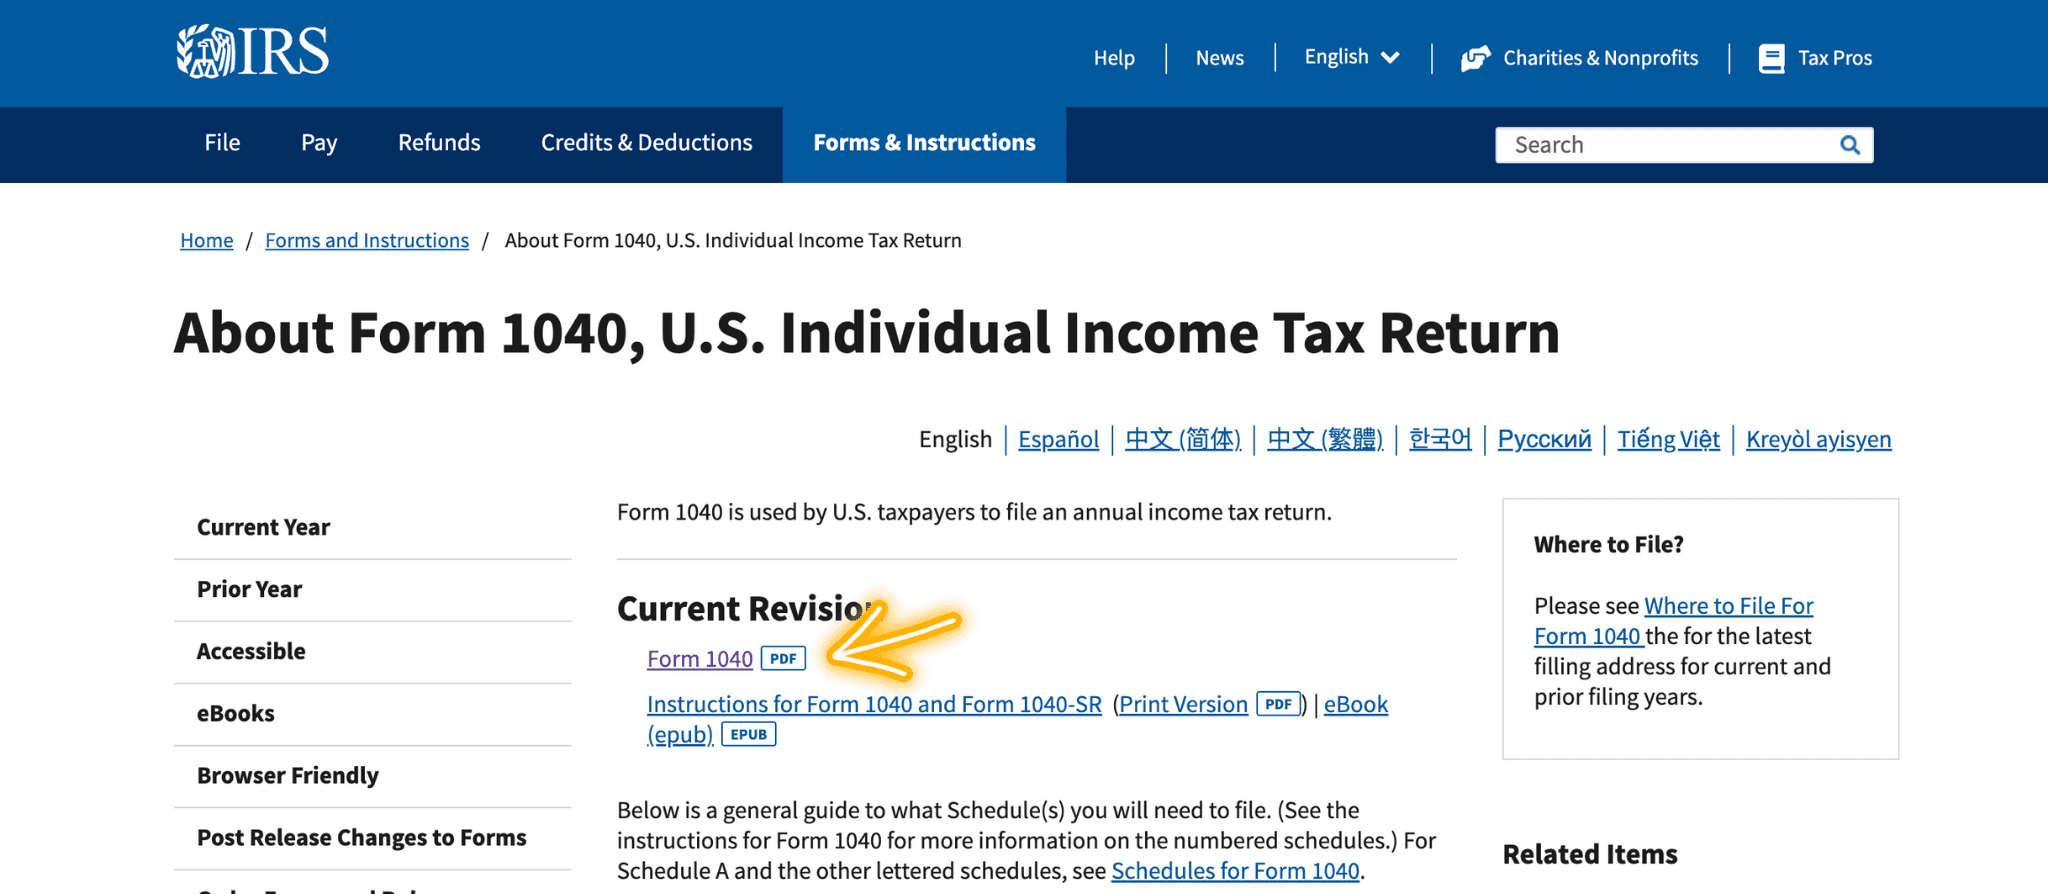 Image with text about Form 1040, used by US taxpayers for annual income tax return. Includes instructions, schedules, refunds, credits, and deductions. #taxes #IRS